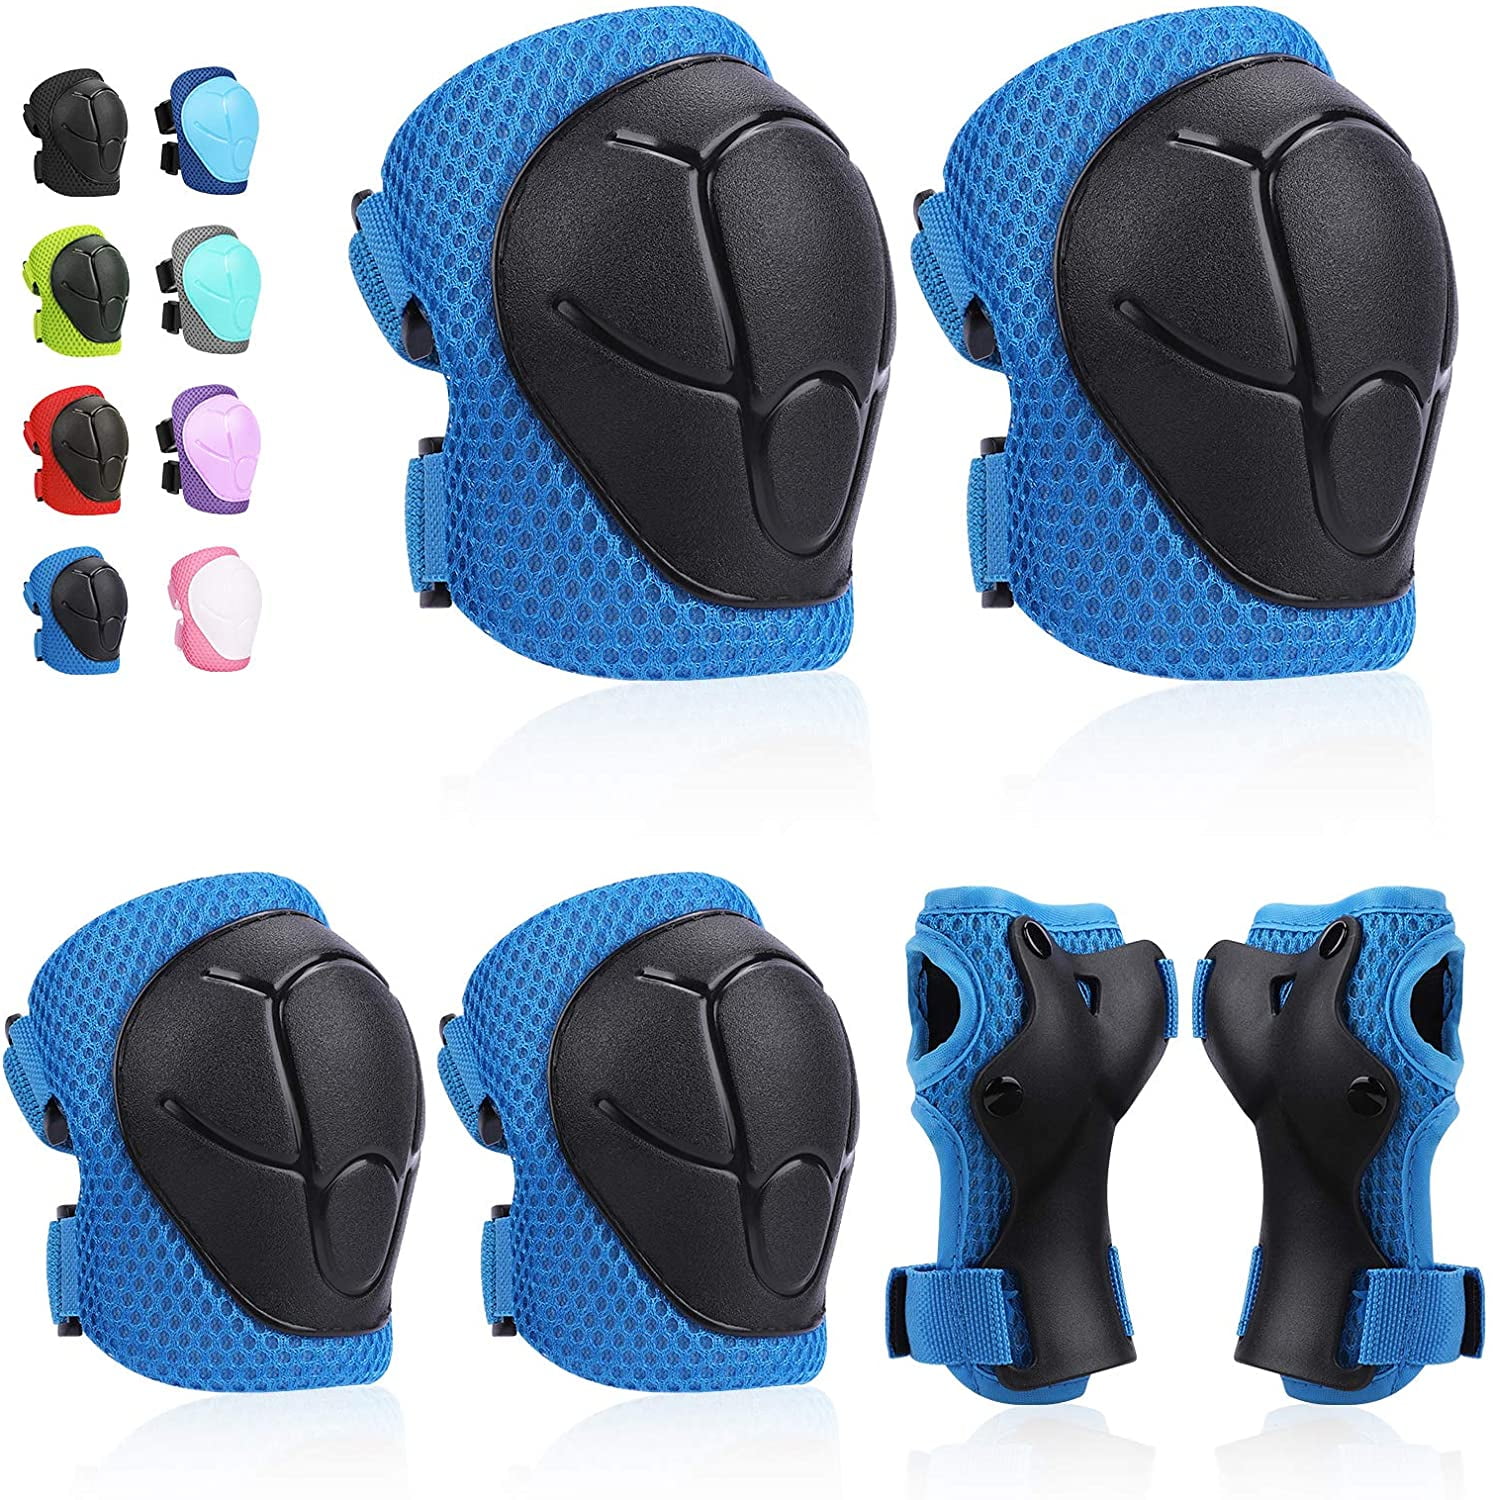 Cycling and Multi Sports Safety Protection: Scooter Riding High Bounce Knee Pads and Elbow Pads with Wrist Guards Protective Gear Set for Biking Skateboard Rollerblades Bicycle 